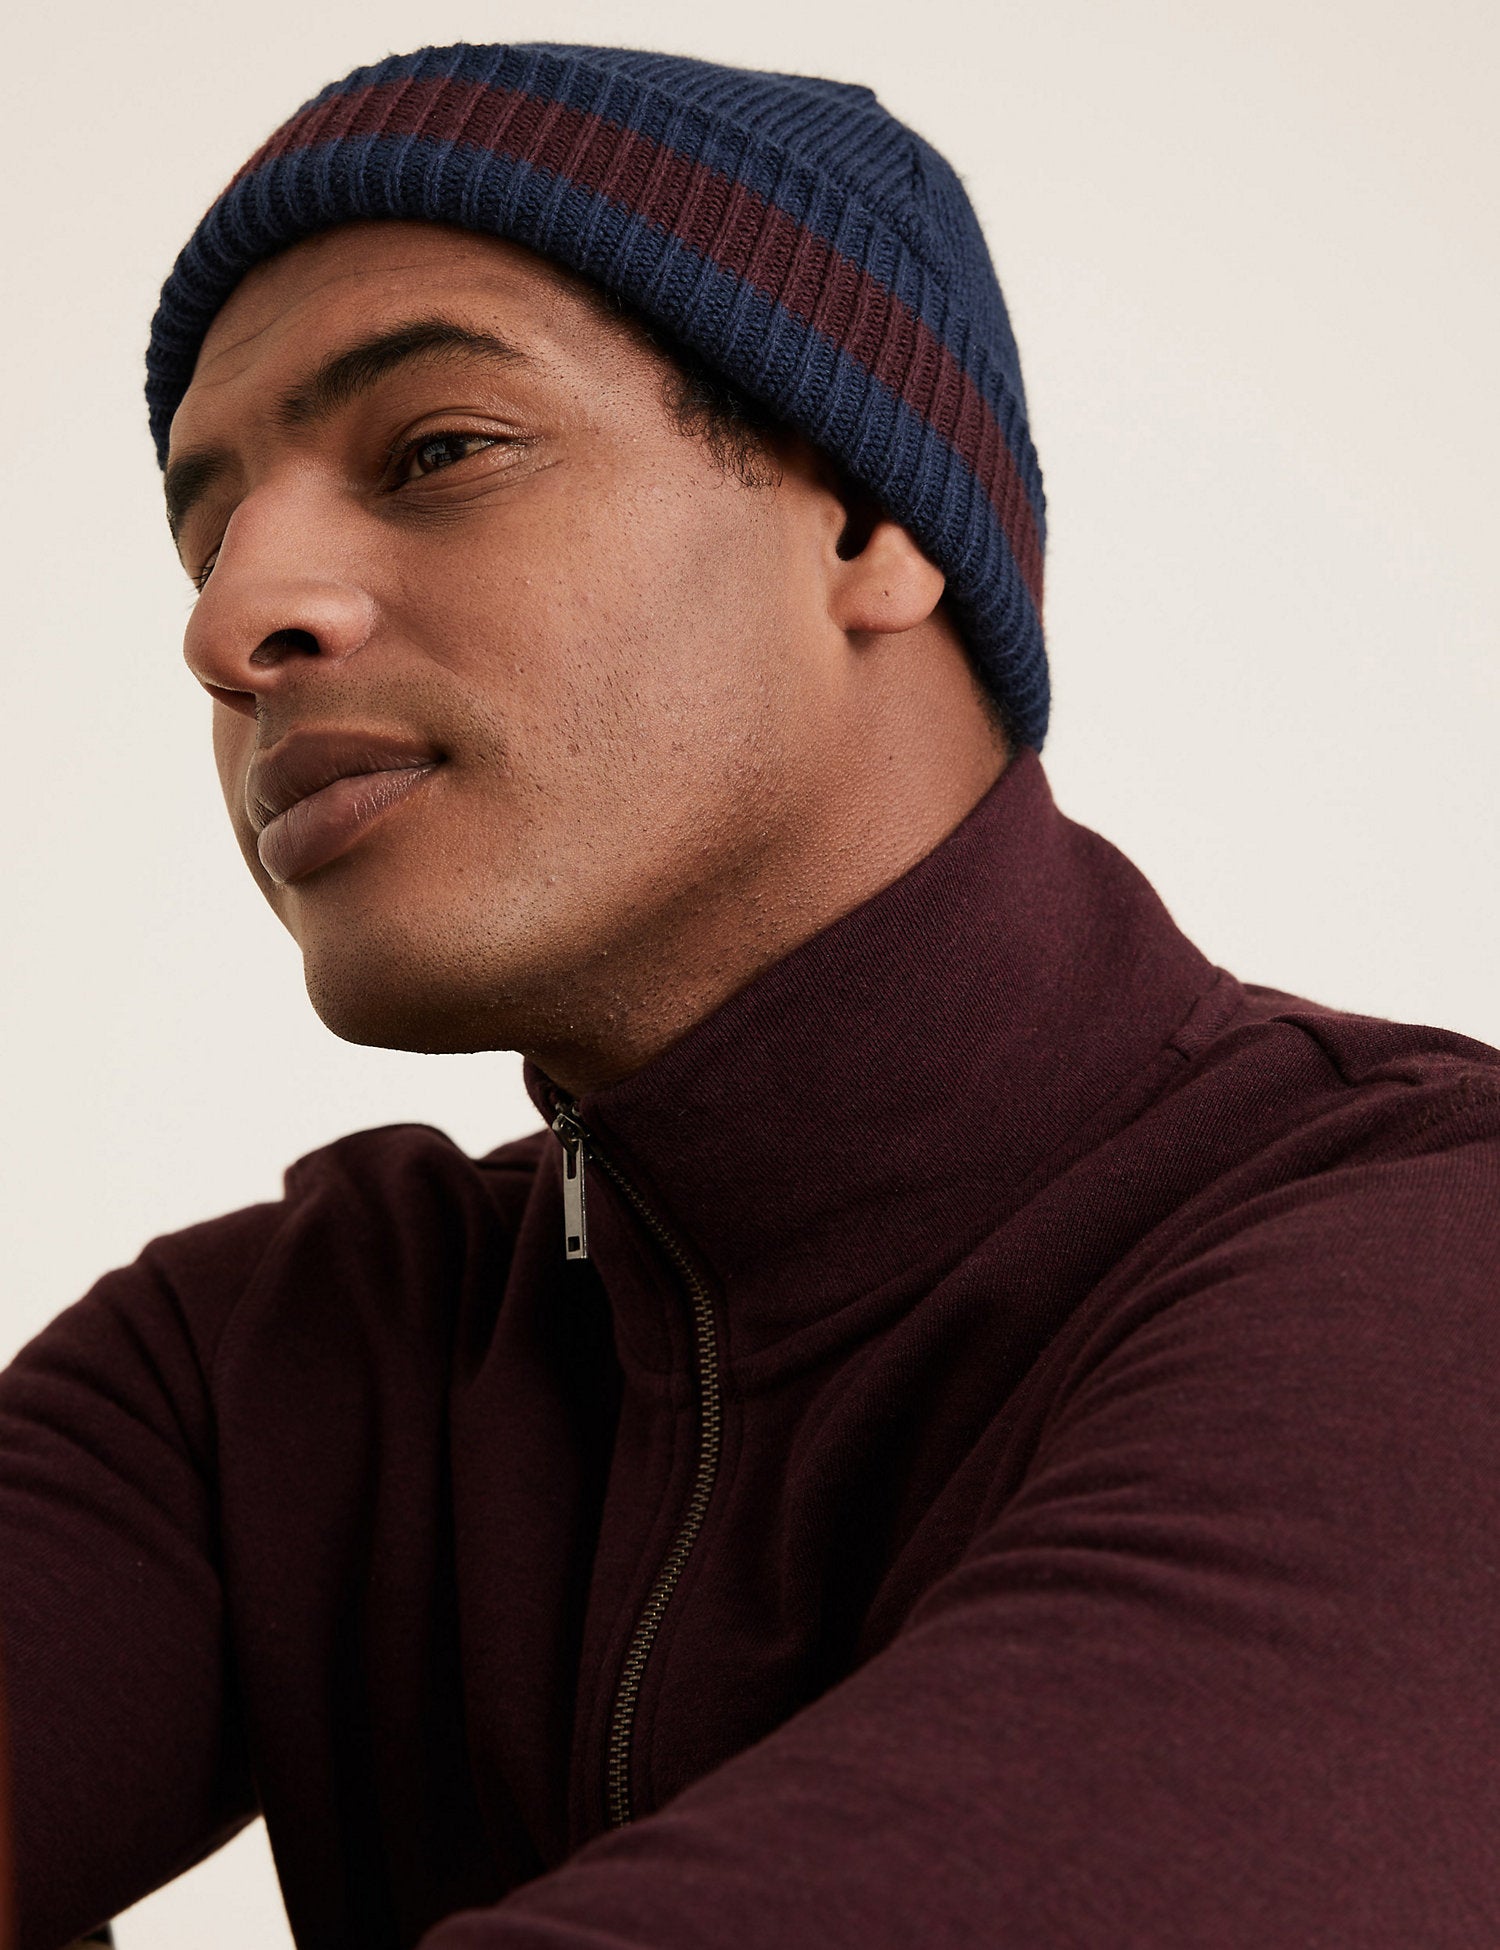 Knitted Beanie Hat with ThermowarmthÂ™